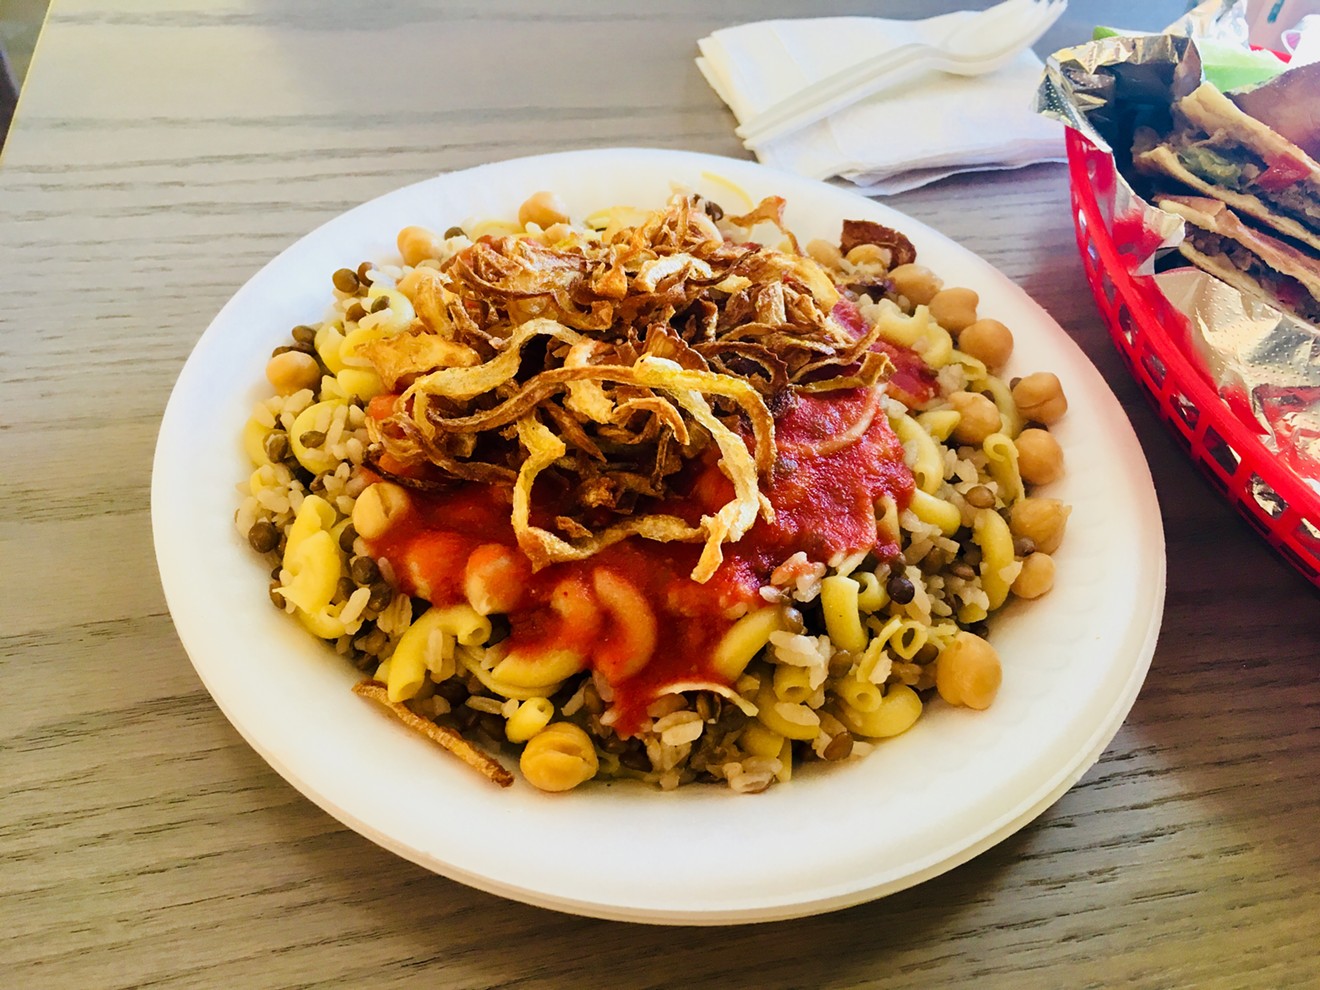 Koshari is Egypt's national dish — and you can now find it on Havana Street.